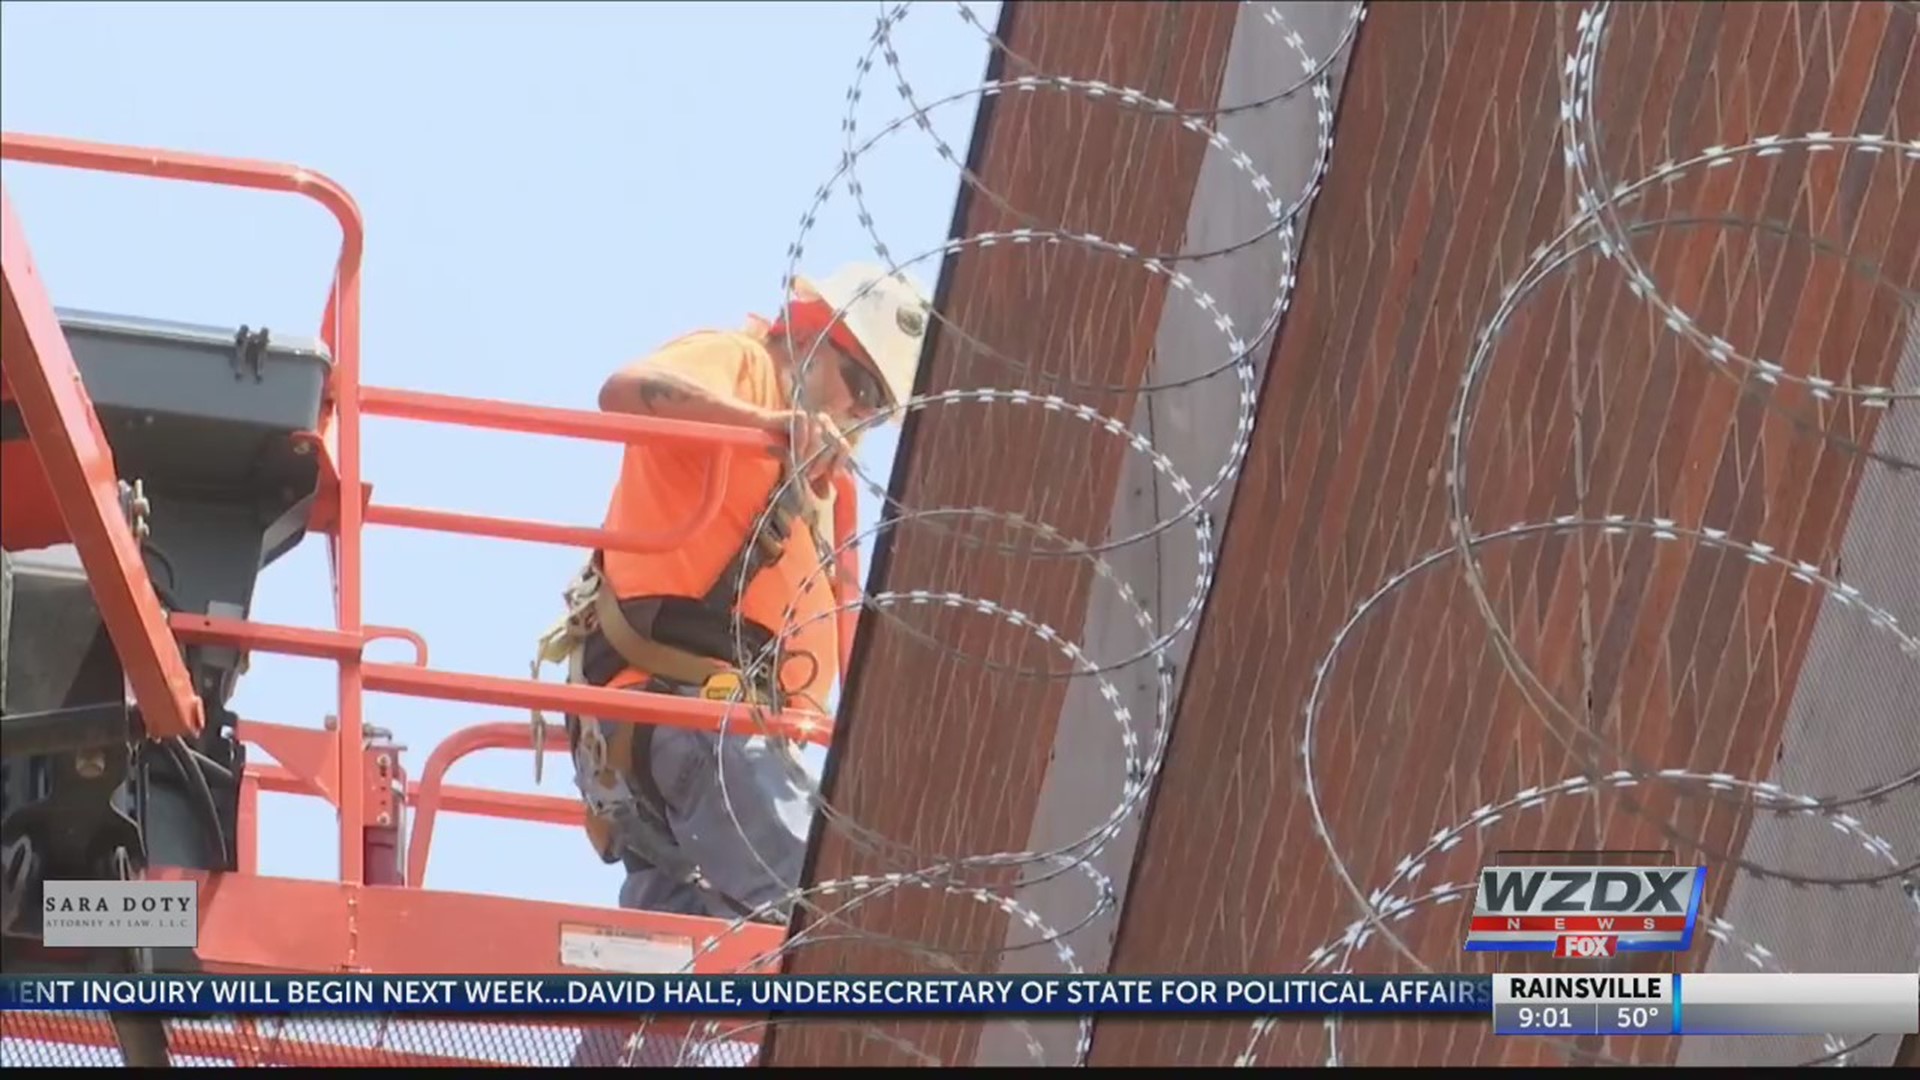 Repairs and improvements are now taking place at the Marshall County Jail.